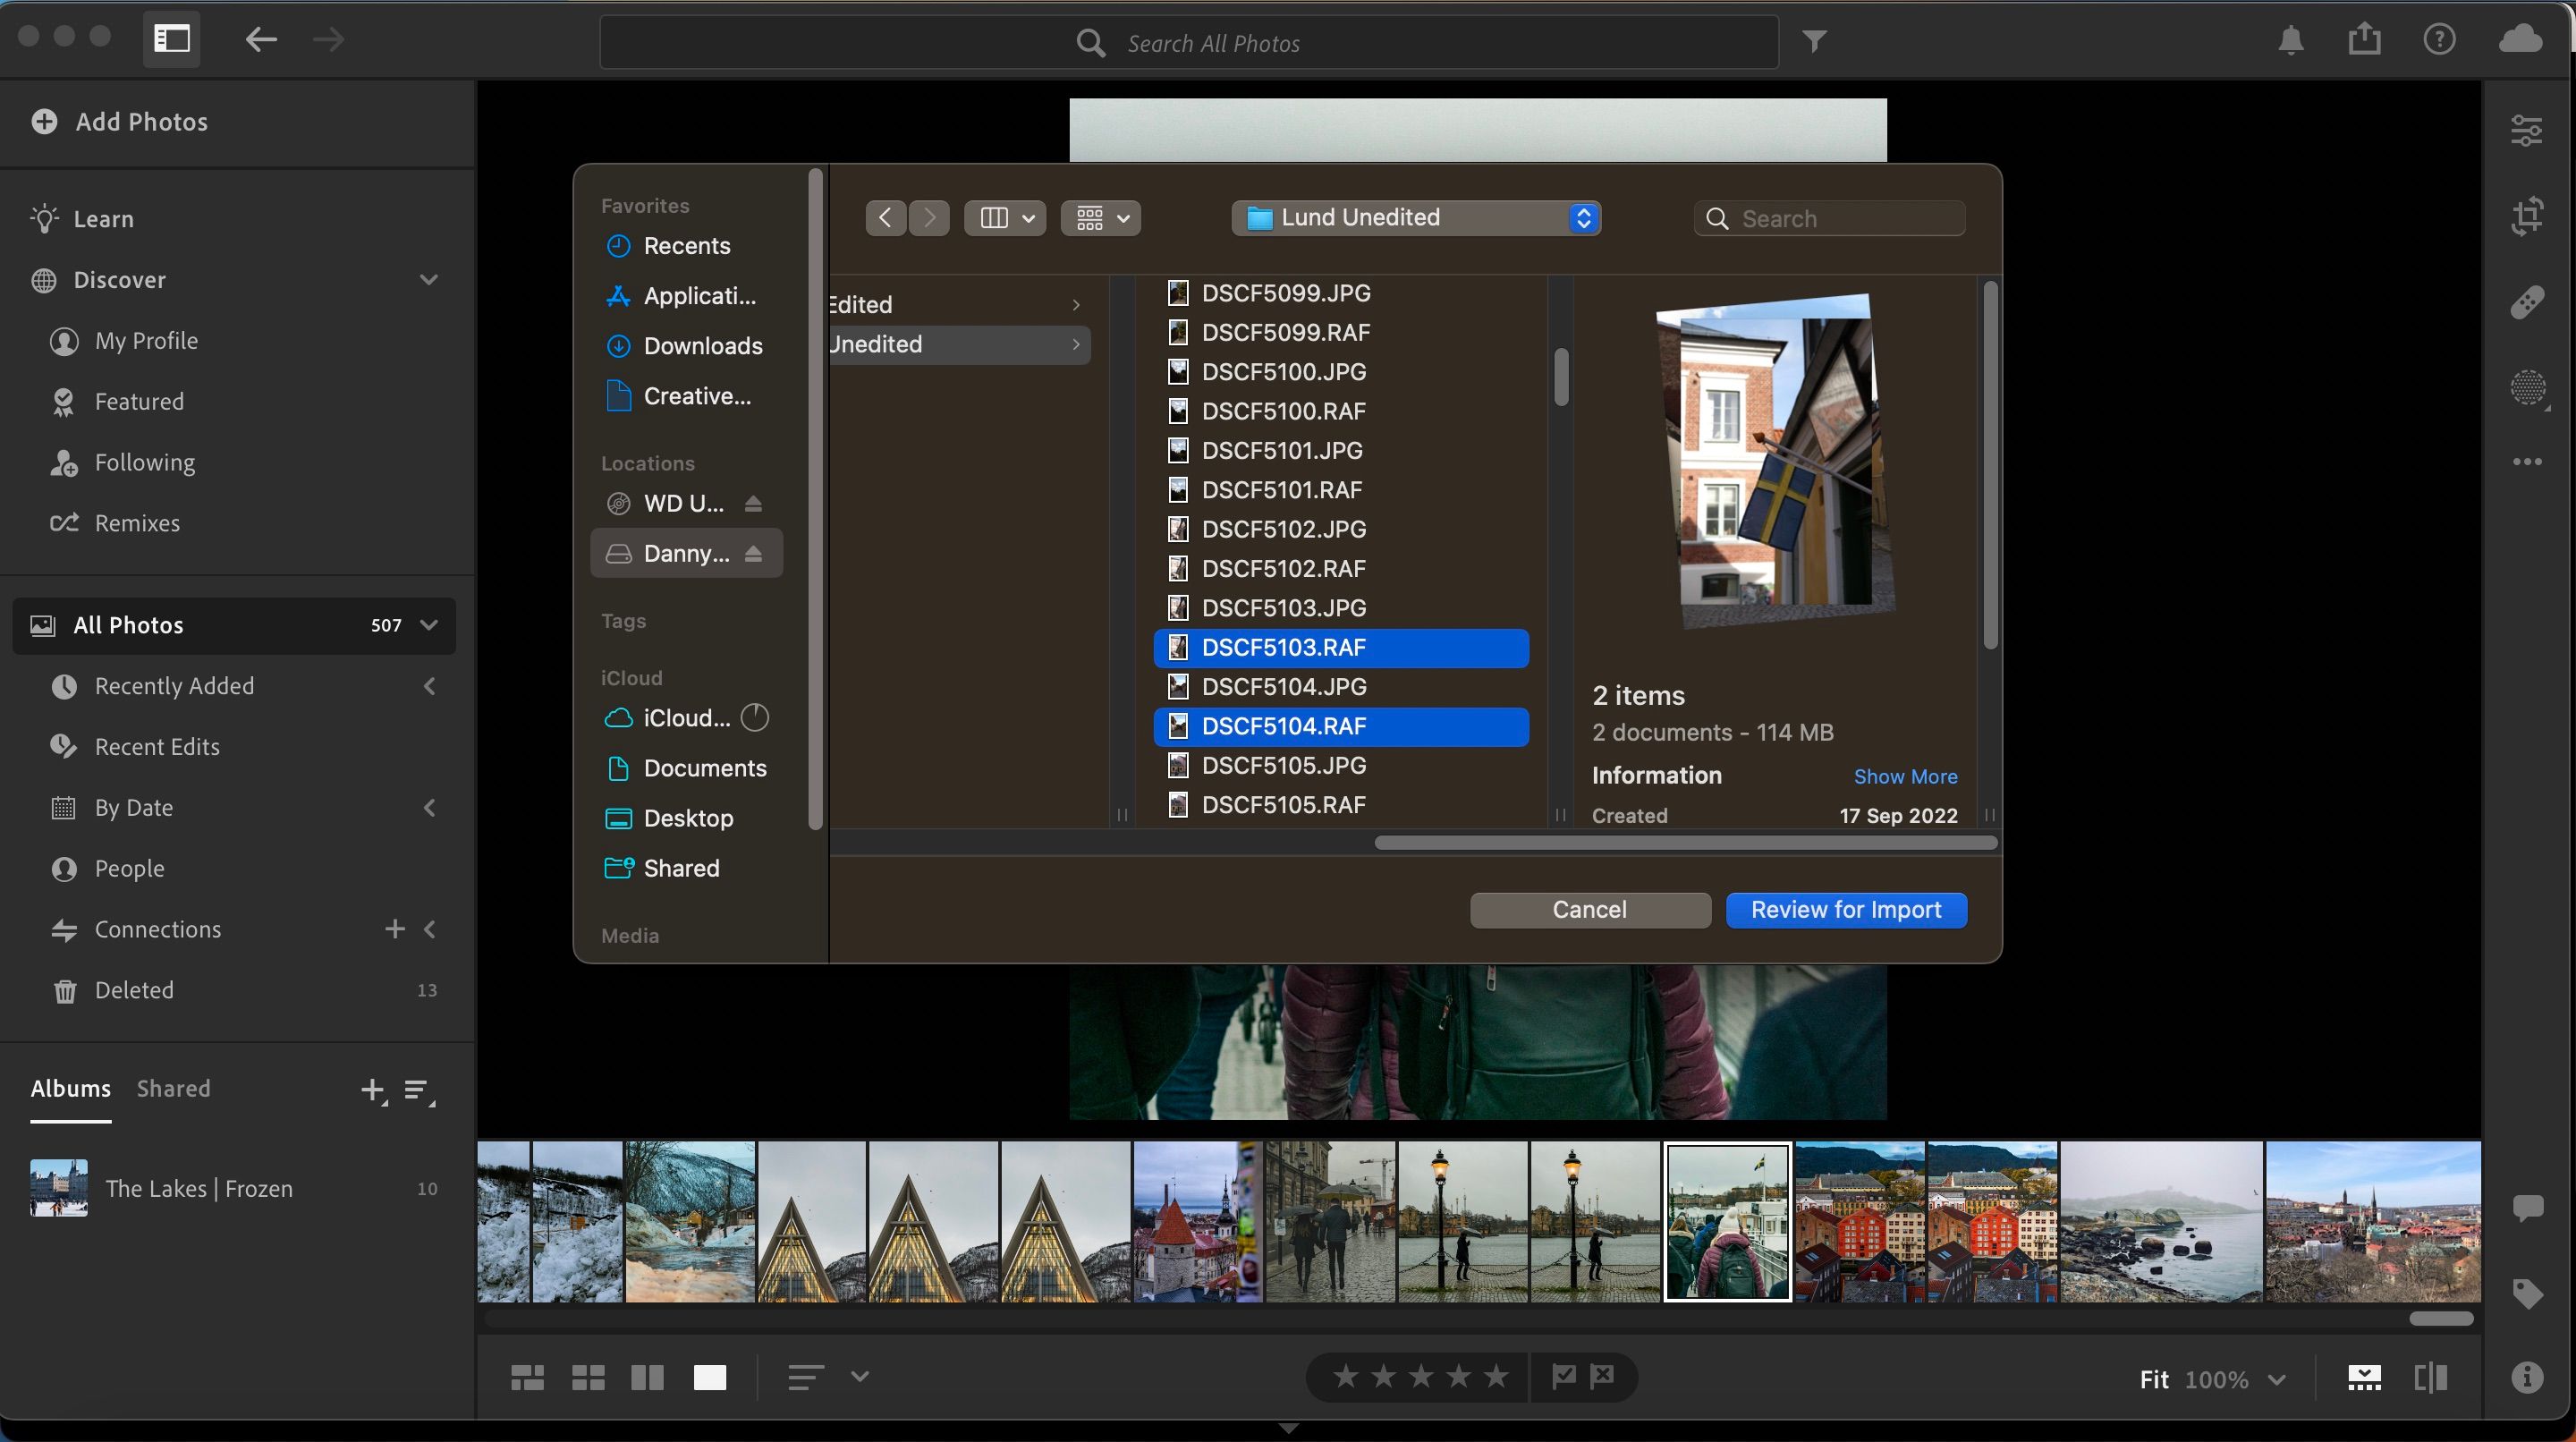 How to Import Photos Into Lightroom: The Complete Guide